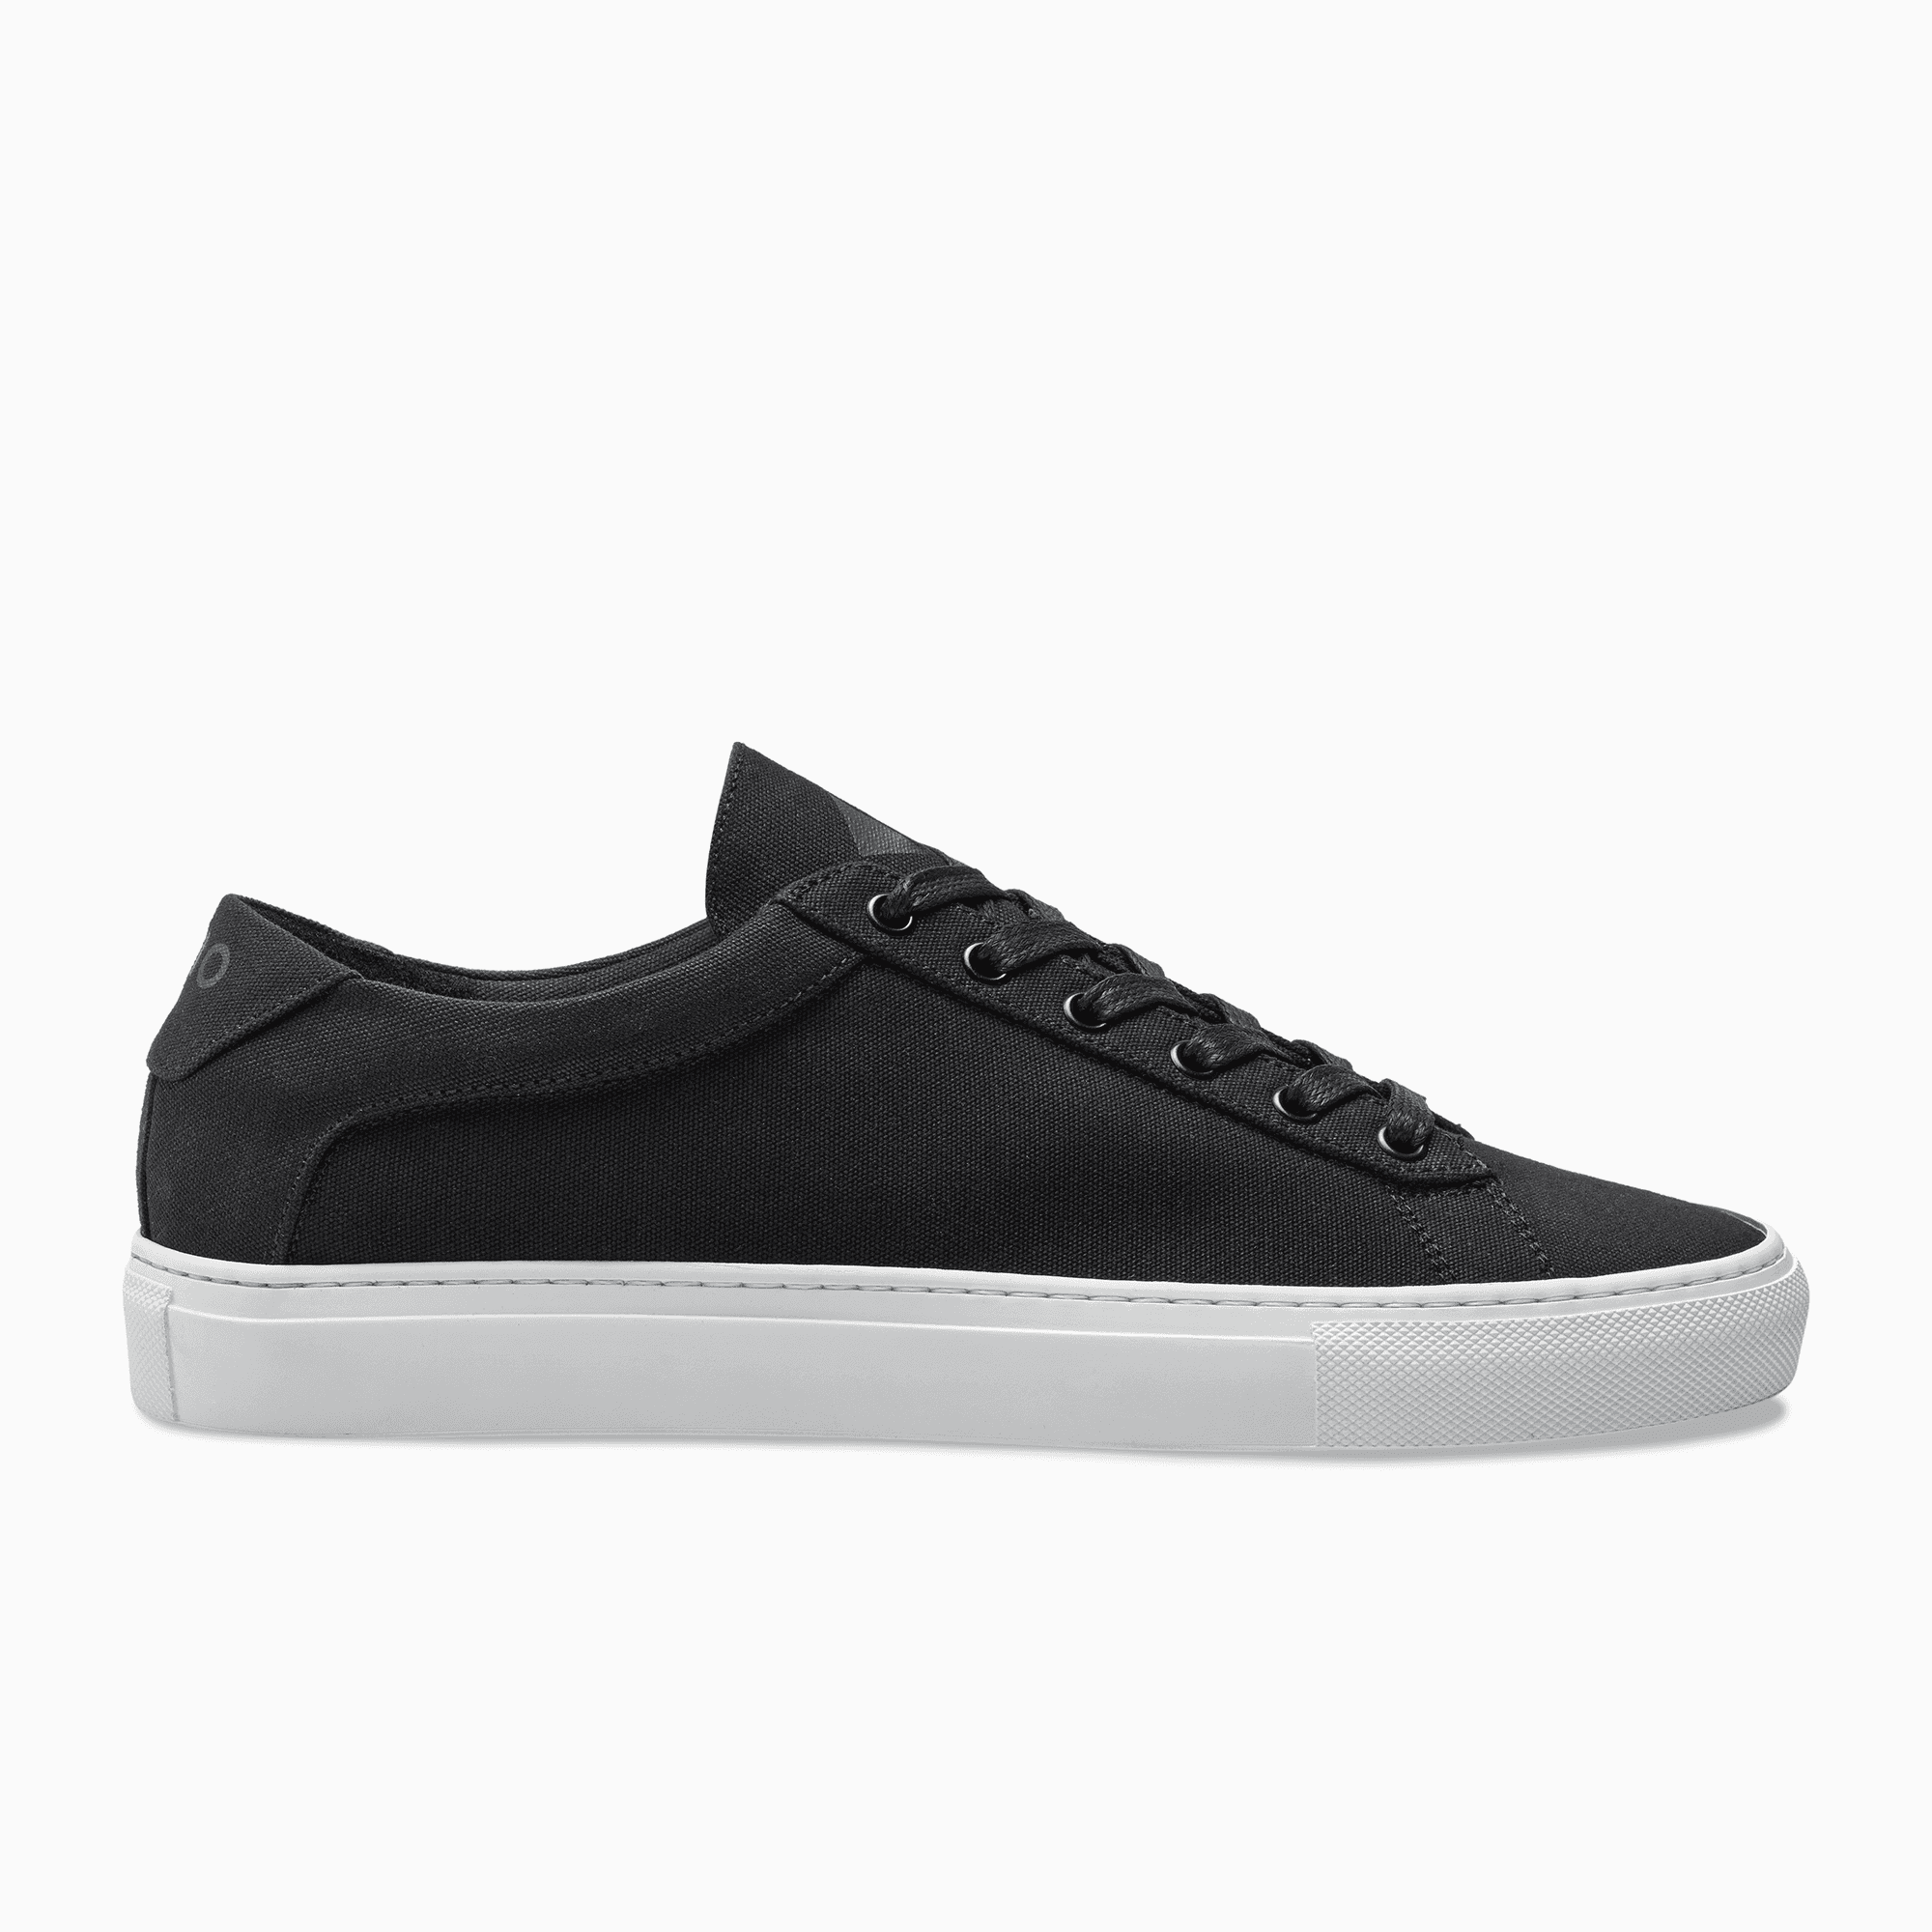 Black Canvas Low Top Sneaker white sole  Mens Koio